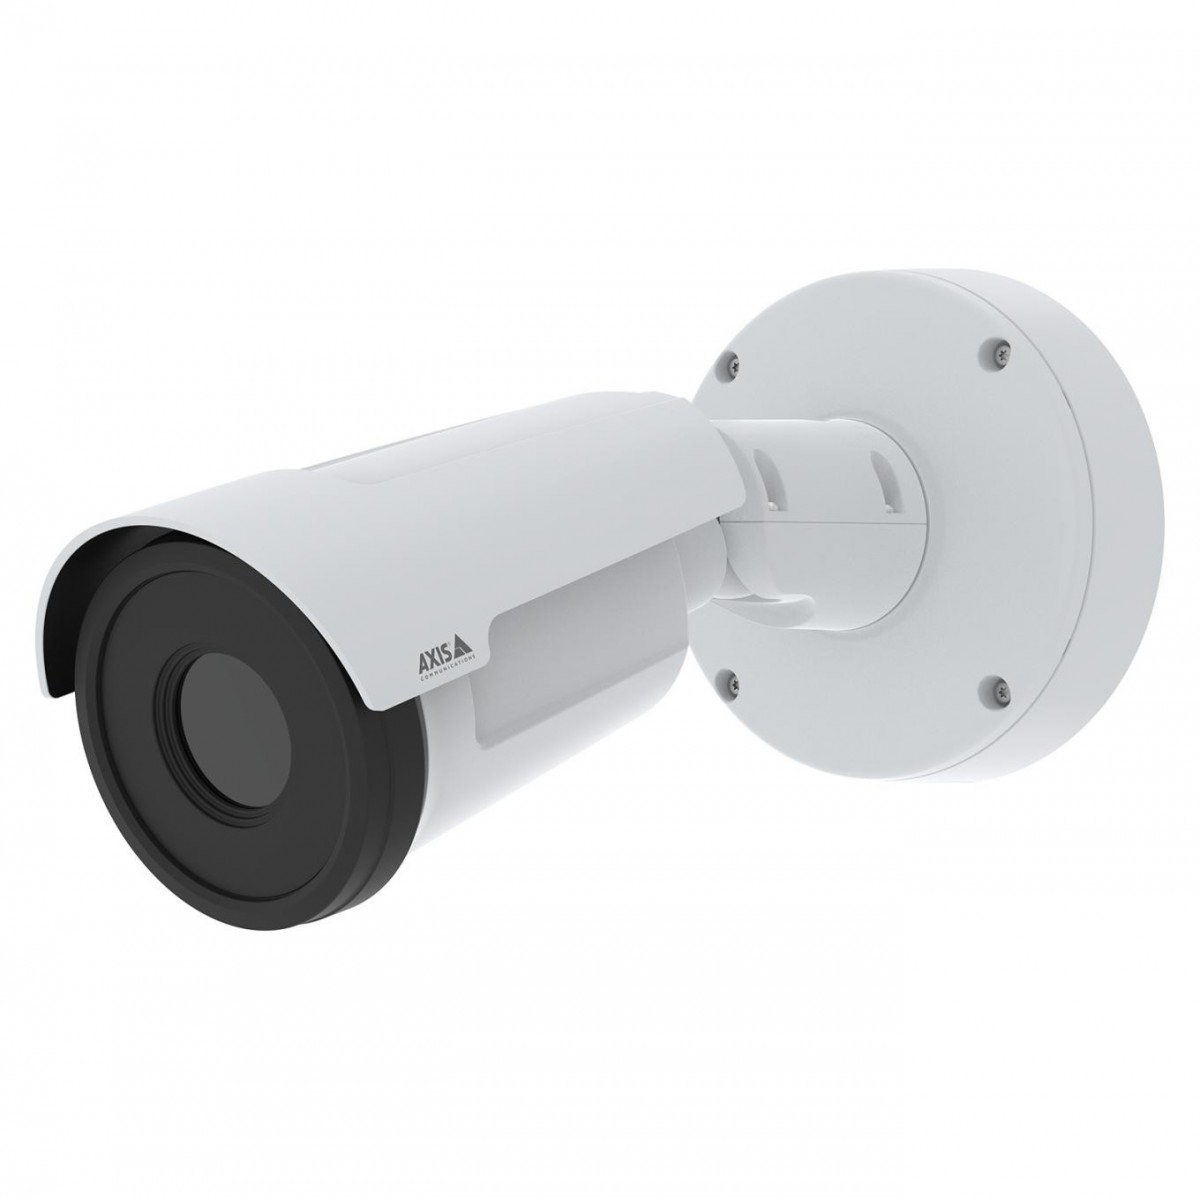 Axis 02176-001 - IP security camera - Outdoor - Wired - ARTPEC-8 - Simplified Chinese - Traditional Chinese - Czech - German - D